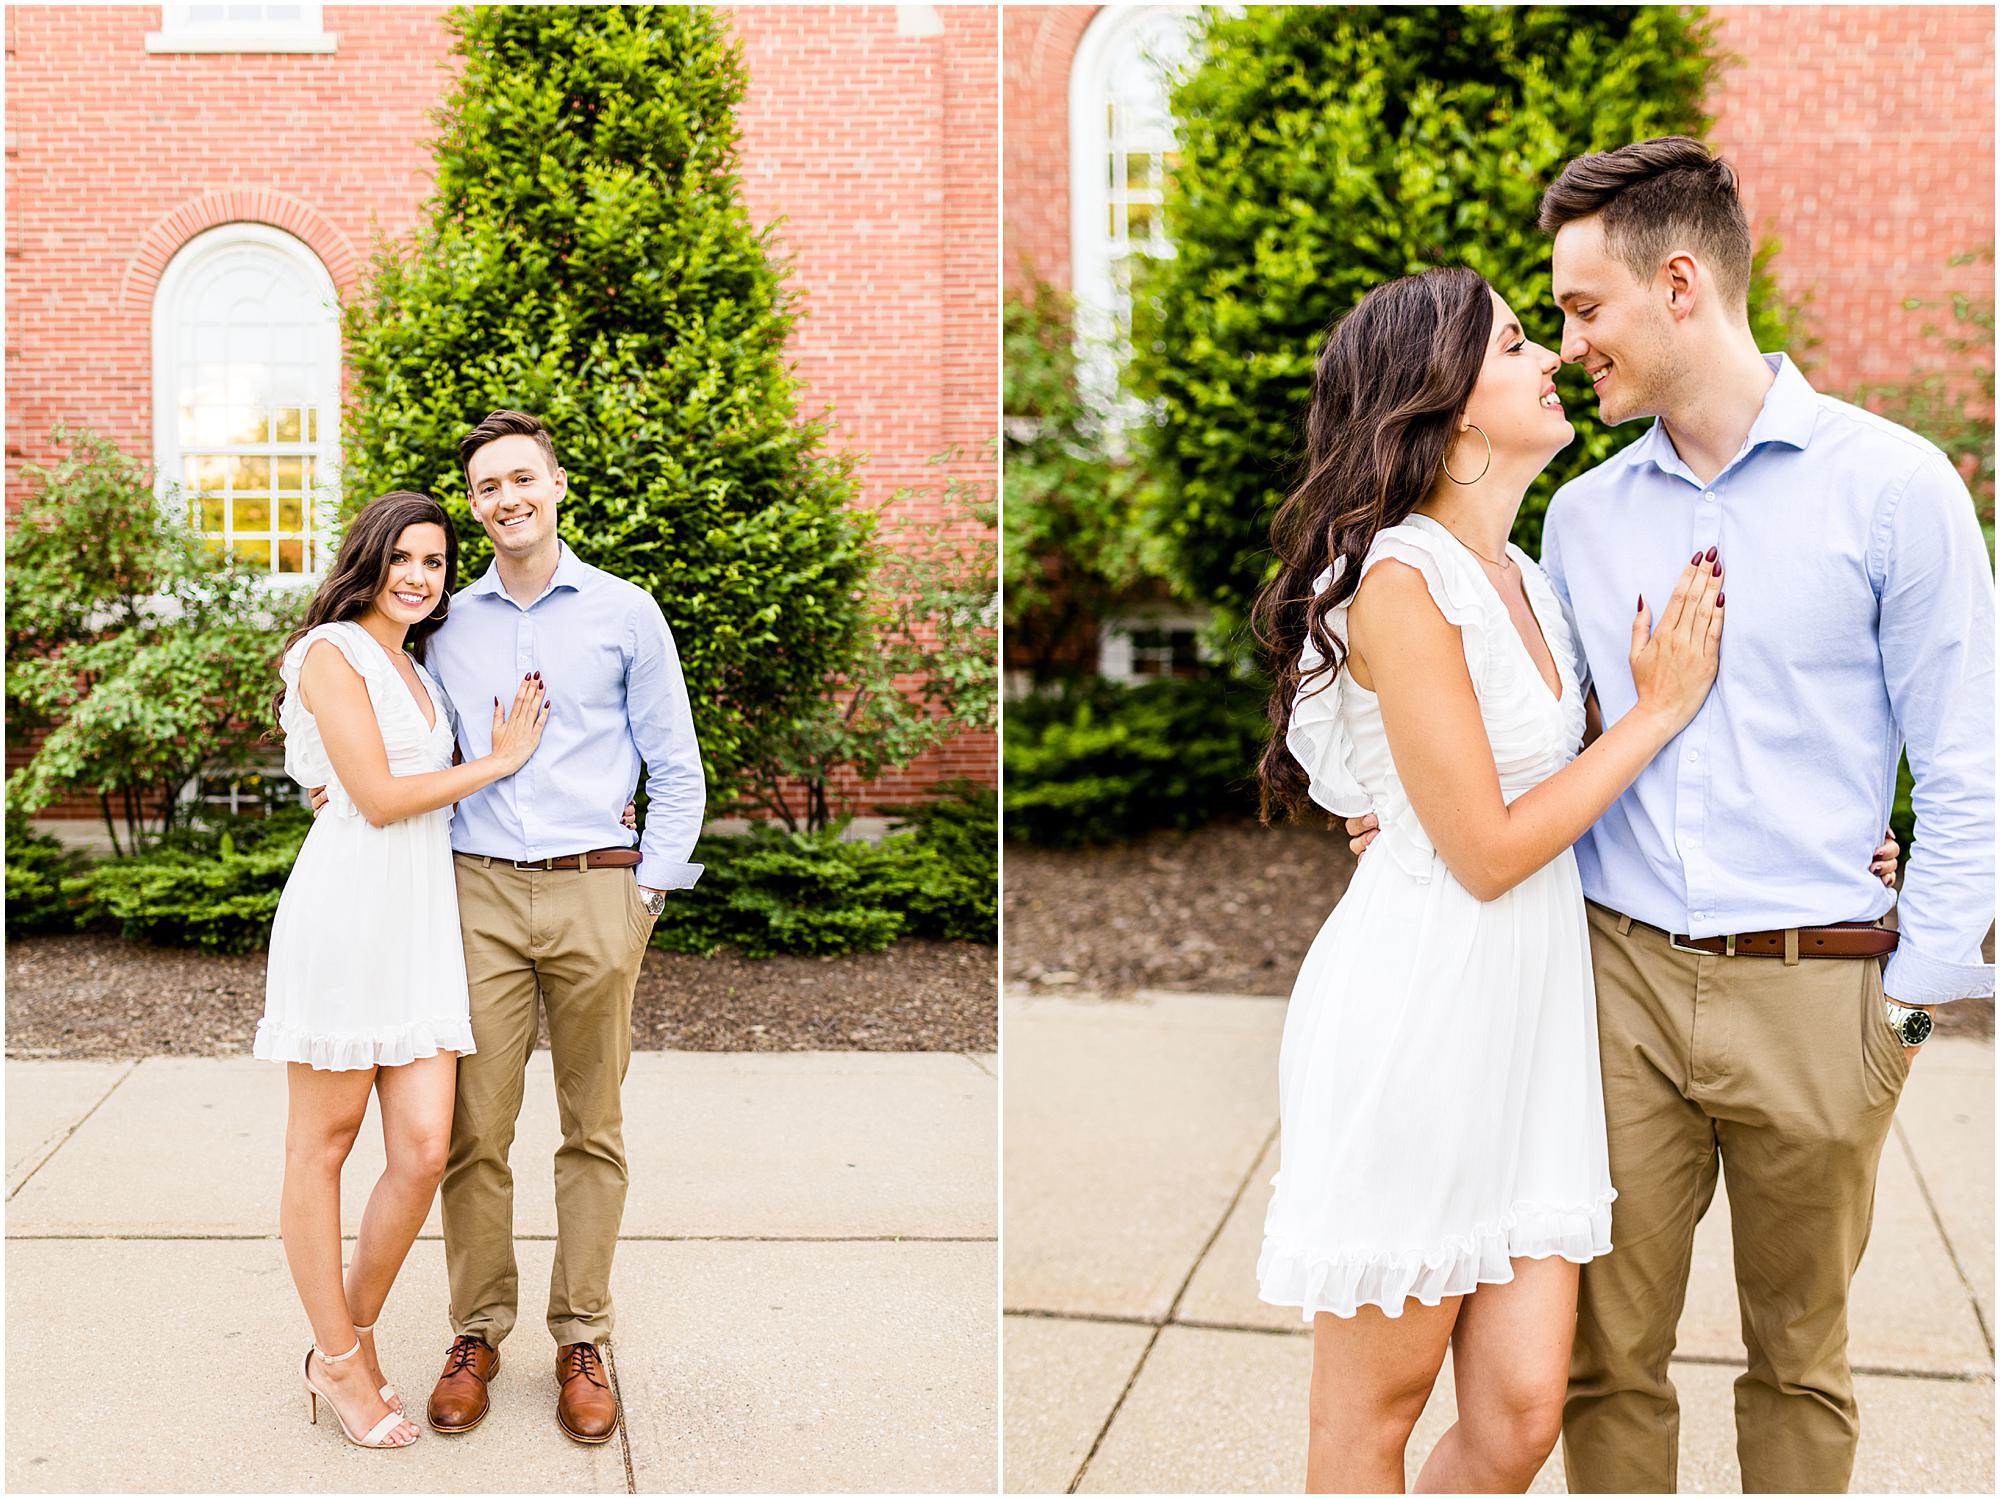 Caitlin-and-Luke-Photography-Illinois-State-University-Proposal-Photos-Normal-IL-engagement-session-Illinois-State-proposal_1060.jpg